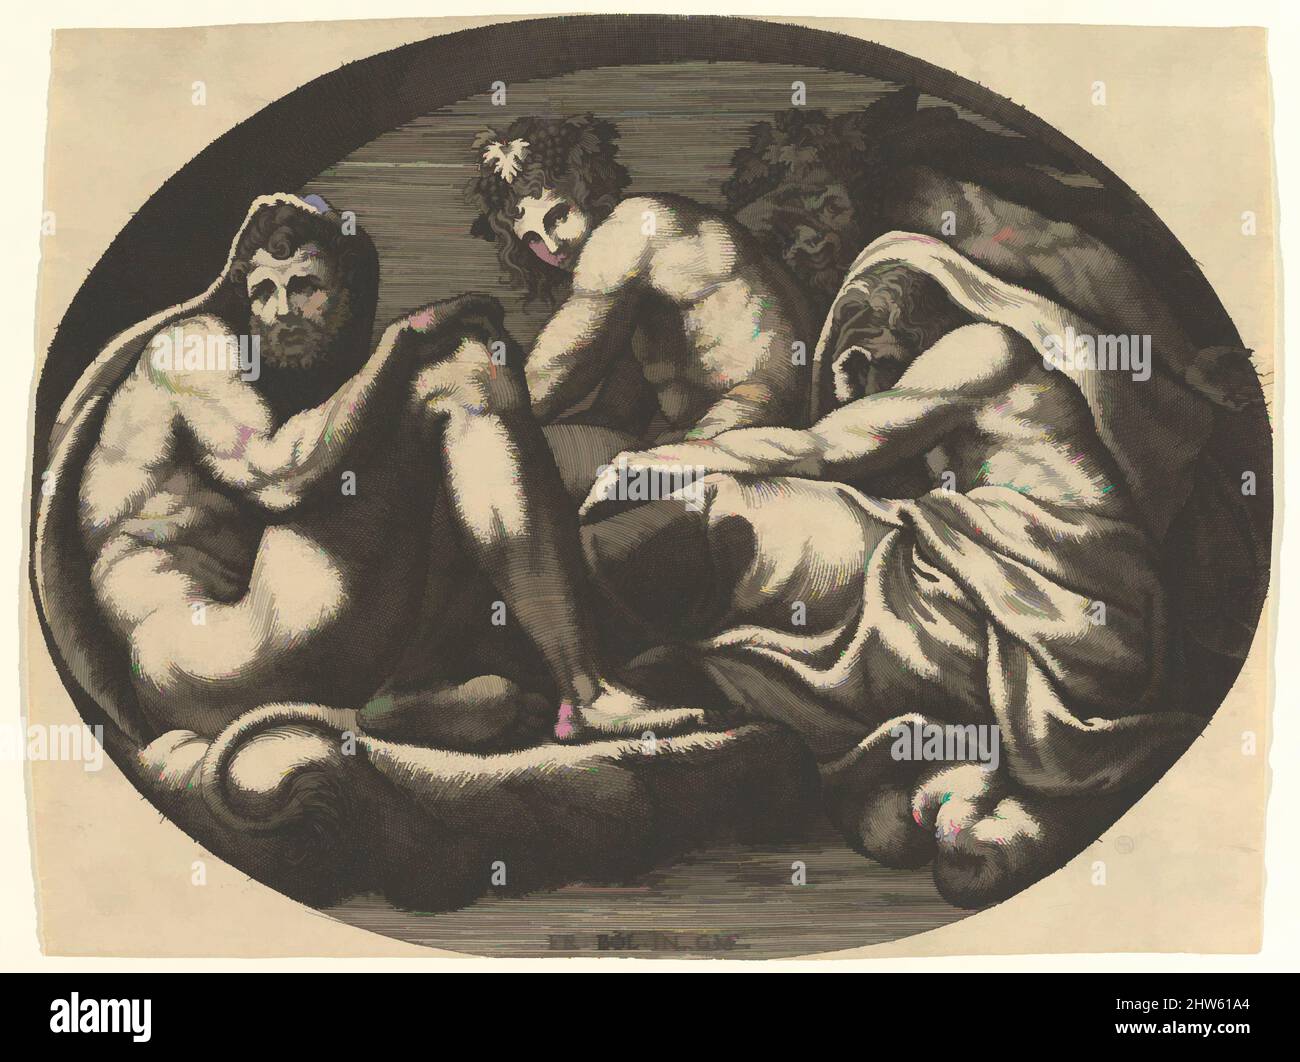 Art inspired by Hercules, Bacchus, Pan, and Saturn(?), from a series of eight compositions after Francesco Primaticcio's designs for the ceiling of the Ulysses Gallery (destroyed 1738-39) at Fontainebleau, 1560s, Engraving, sheet: 6 13/16 x 9 in. (17.3 x 22.8 cm) trimmed within, Classic works modernized by Artotop with a splash of modernity. Shapes, color and value, eye-catching visual impact on art. Emotions through freedom of artworks in a contemporary way. A timeless message pursuing a wildly creative new direction. Artists turning to the digital medium and creating the Artotop NFT Stock Photo